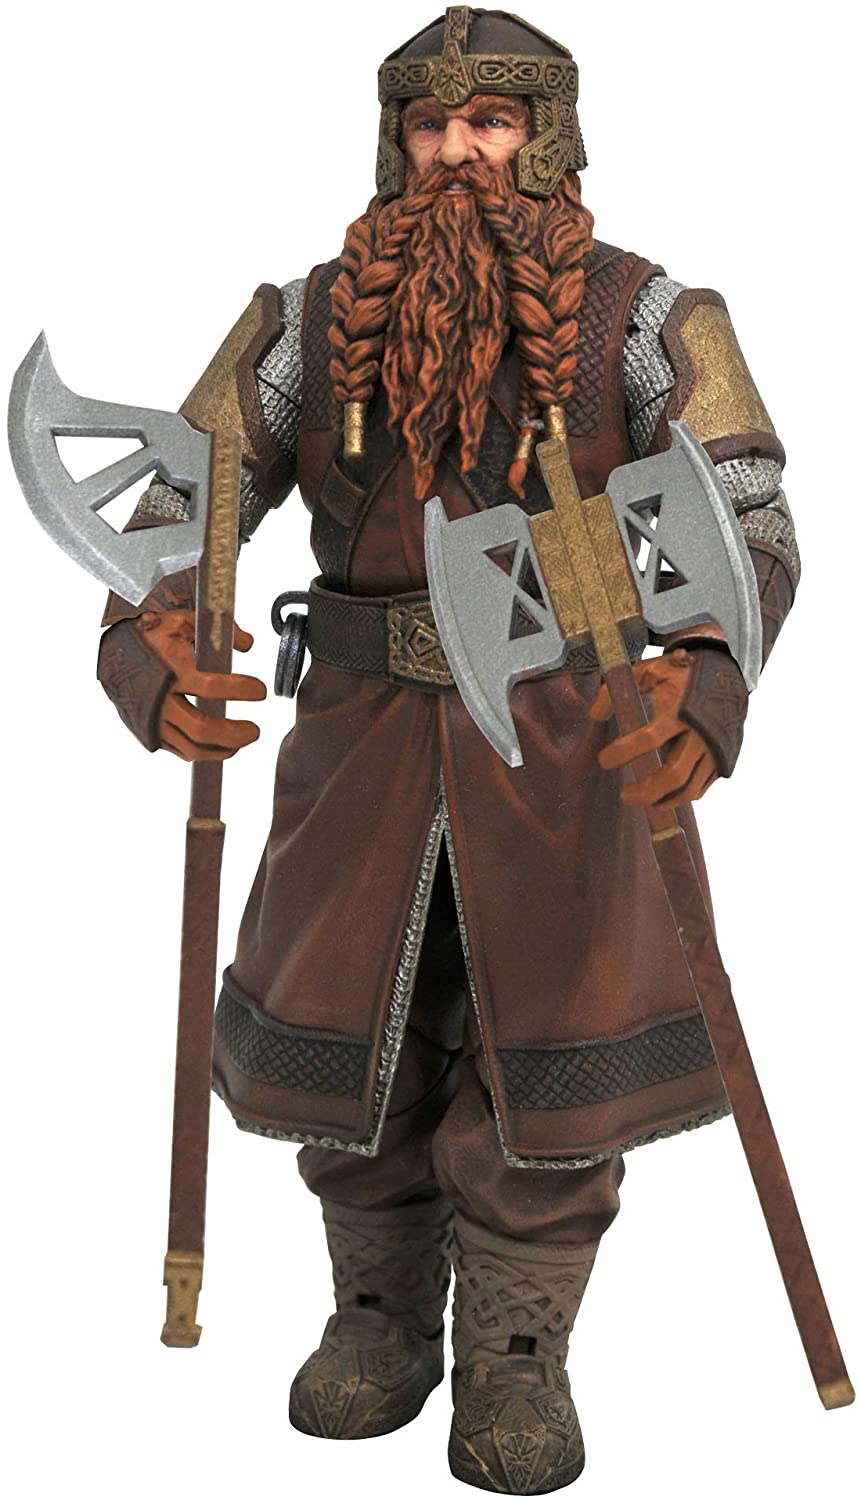 The Lord of the Rings - Frodo Baggins - Diamond Select action-figure